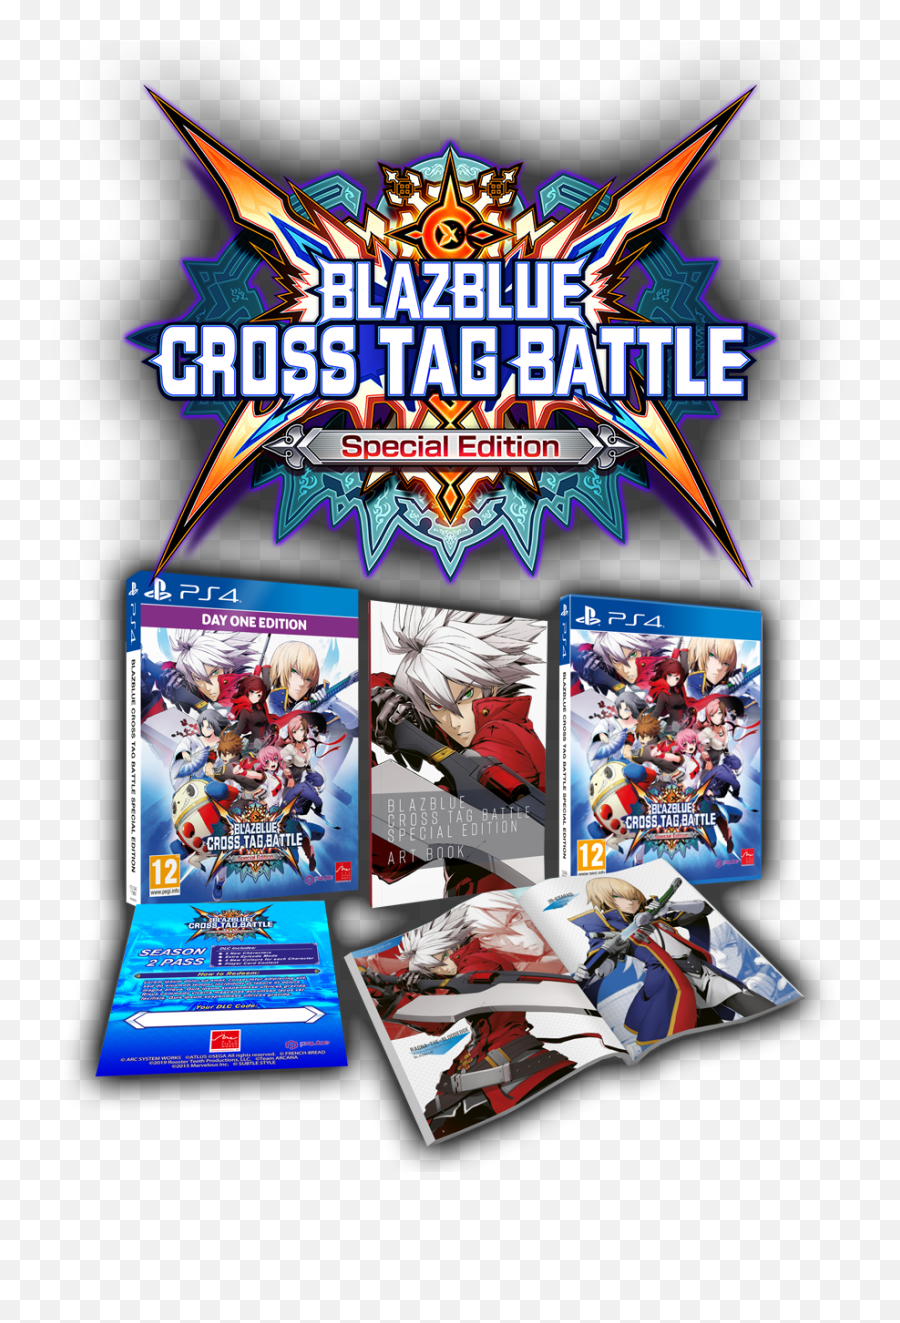 Blazblue - Cross Tag Battle Available For Playstation 4 Blazblue Cross Tag Battle Dlc Playstation 4 Emoji,Tag Logo